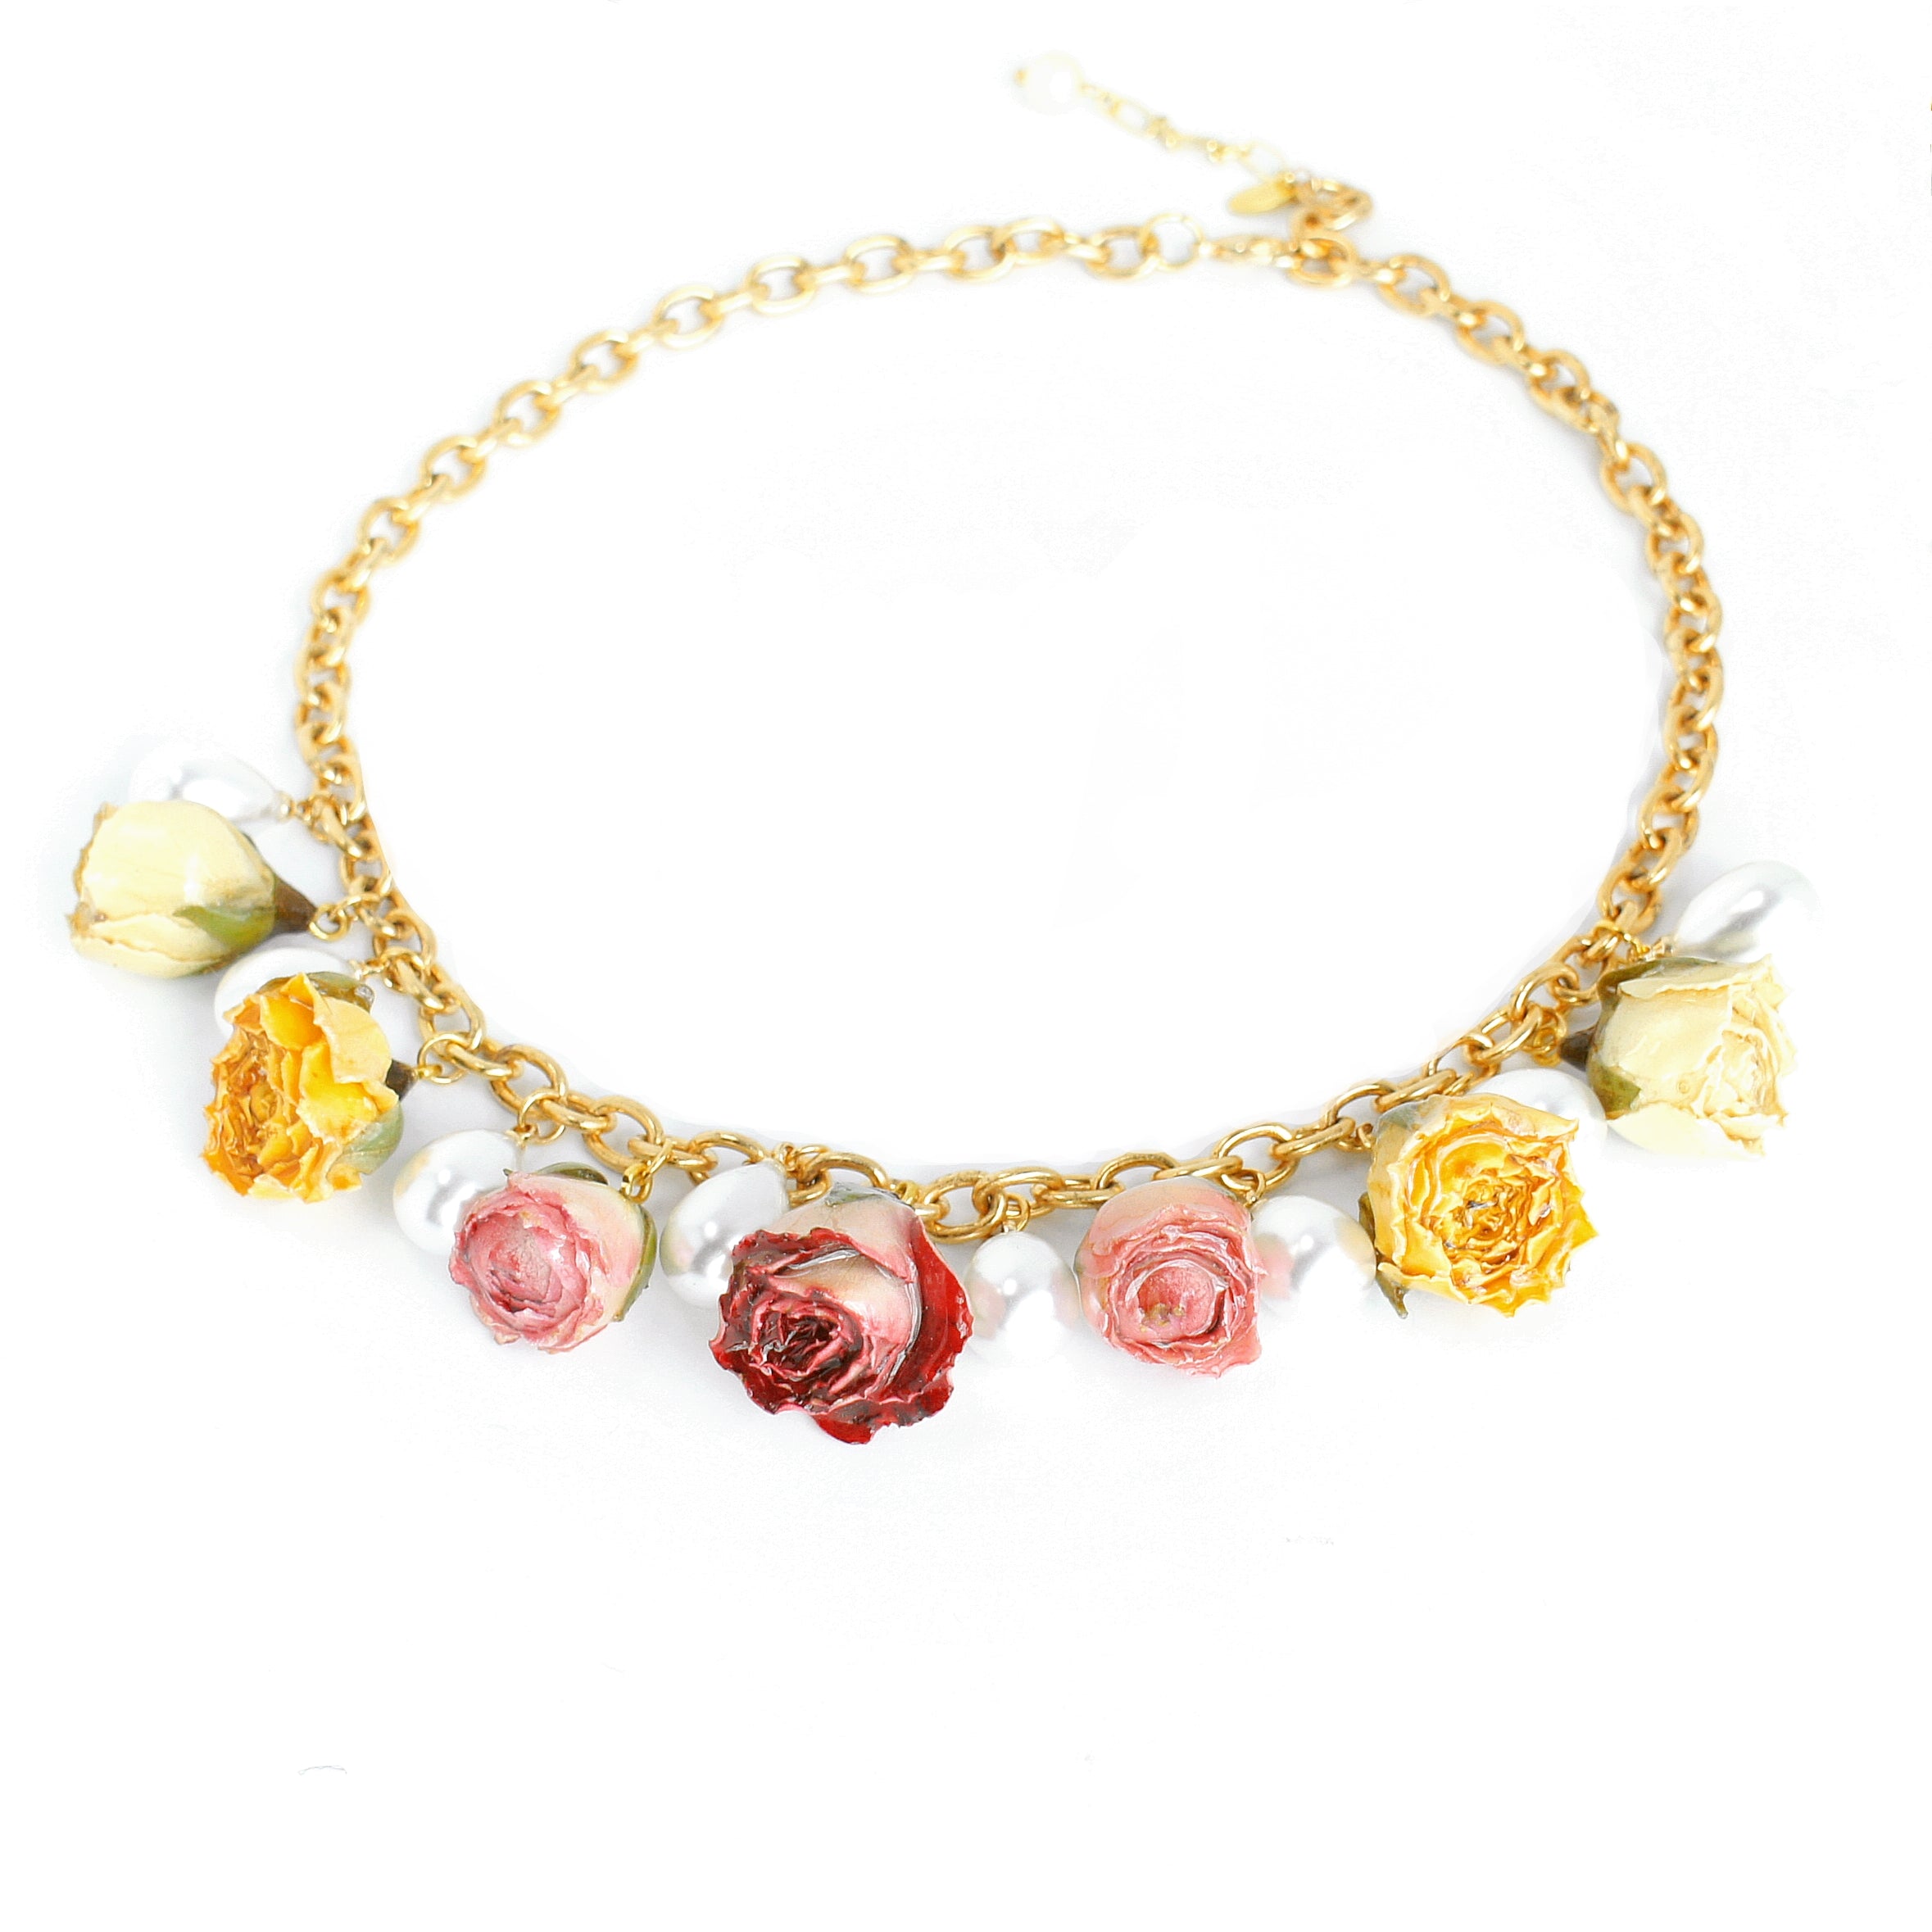 *REAL FLOWER* Queen Anne Rosebud and Teardrop Pearl Charm Necklace